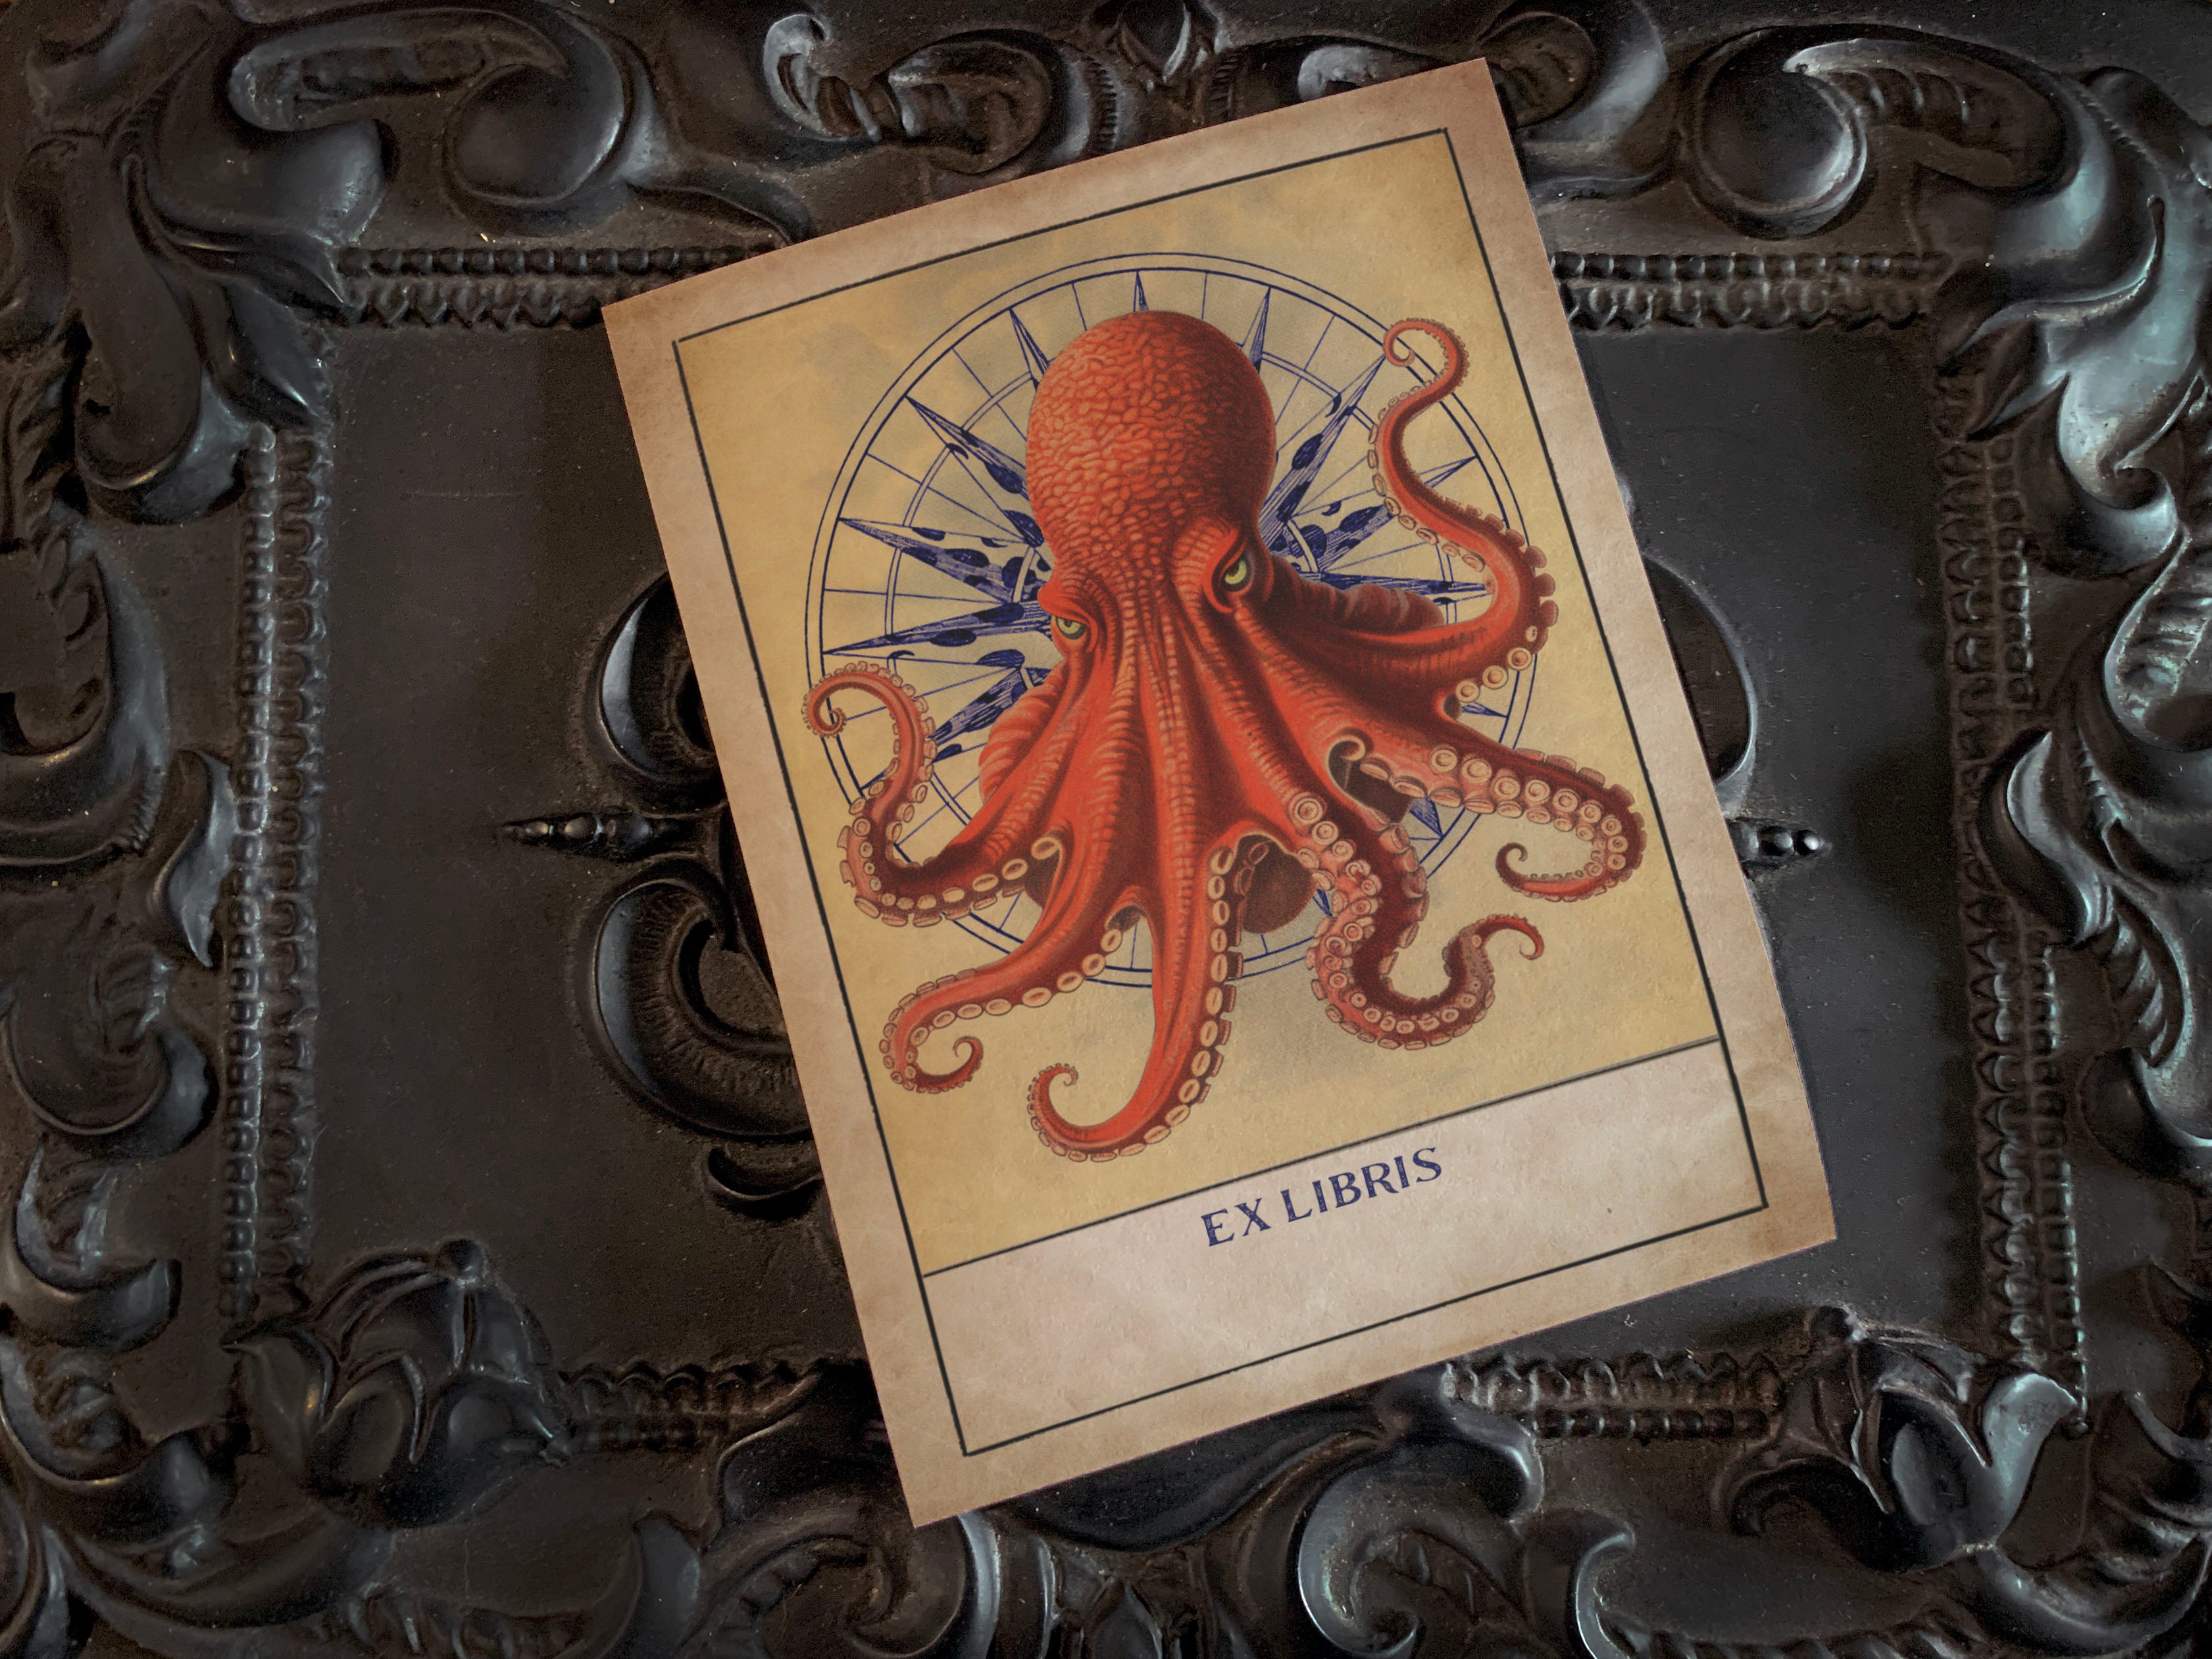 Red Octopus, Personalized Ex-Libris Bookplates, Crafted on Traditional Gummed Paper, 3in x 4in, Set of 30